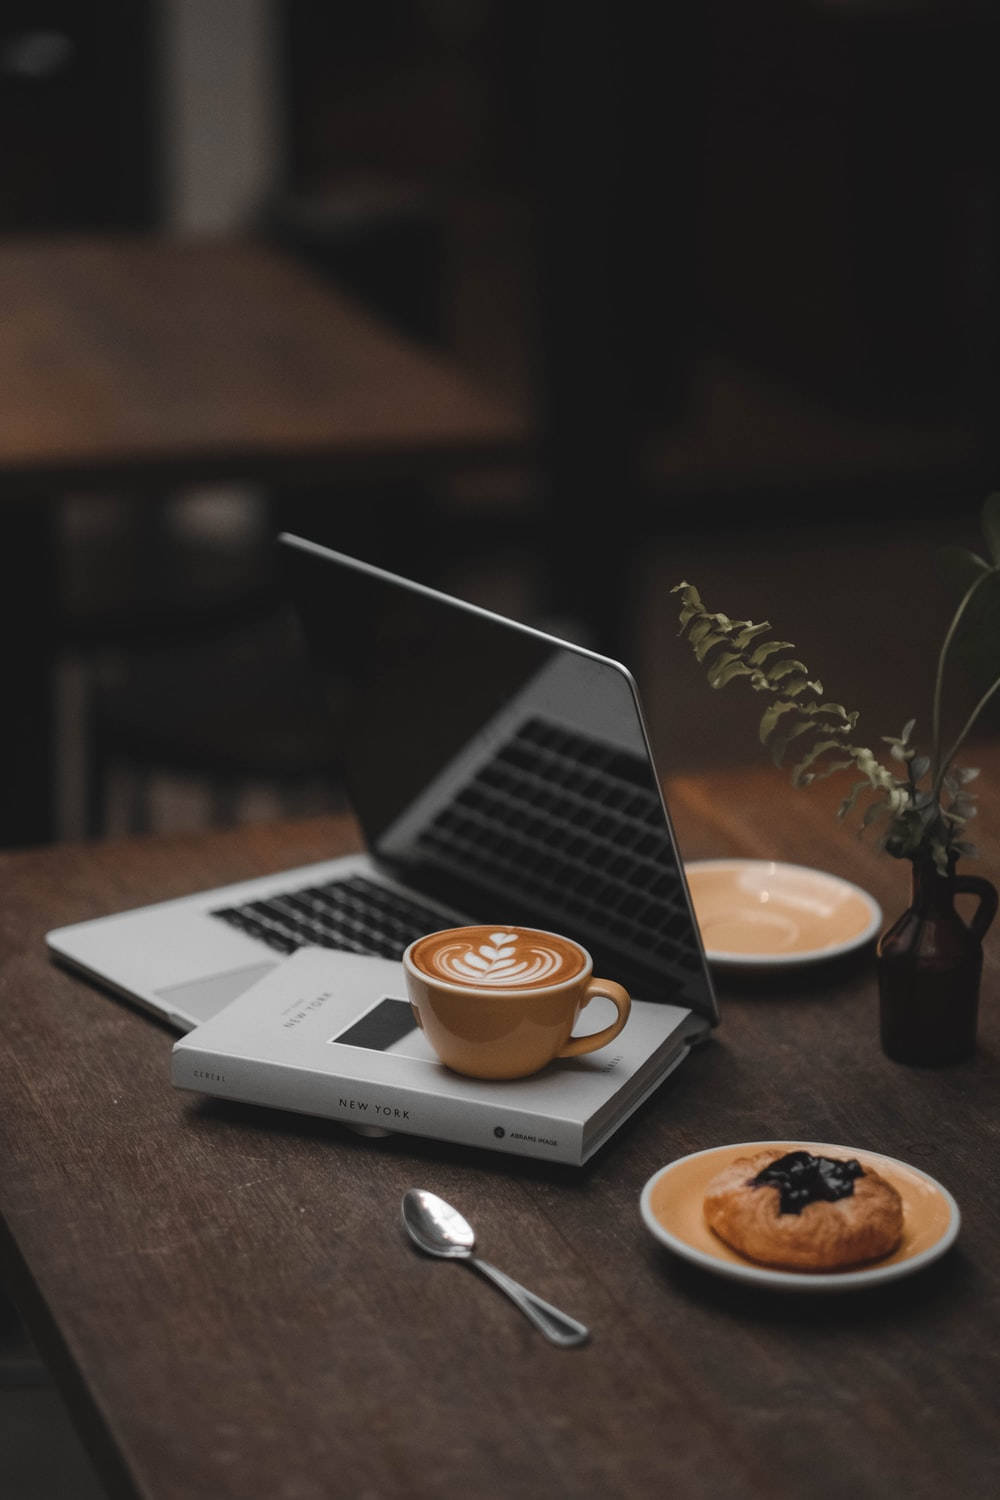 Focused Photography Of Coffee On Laptop Background